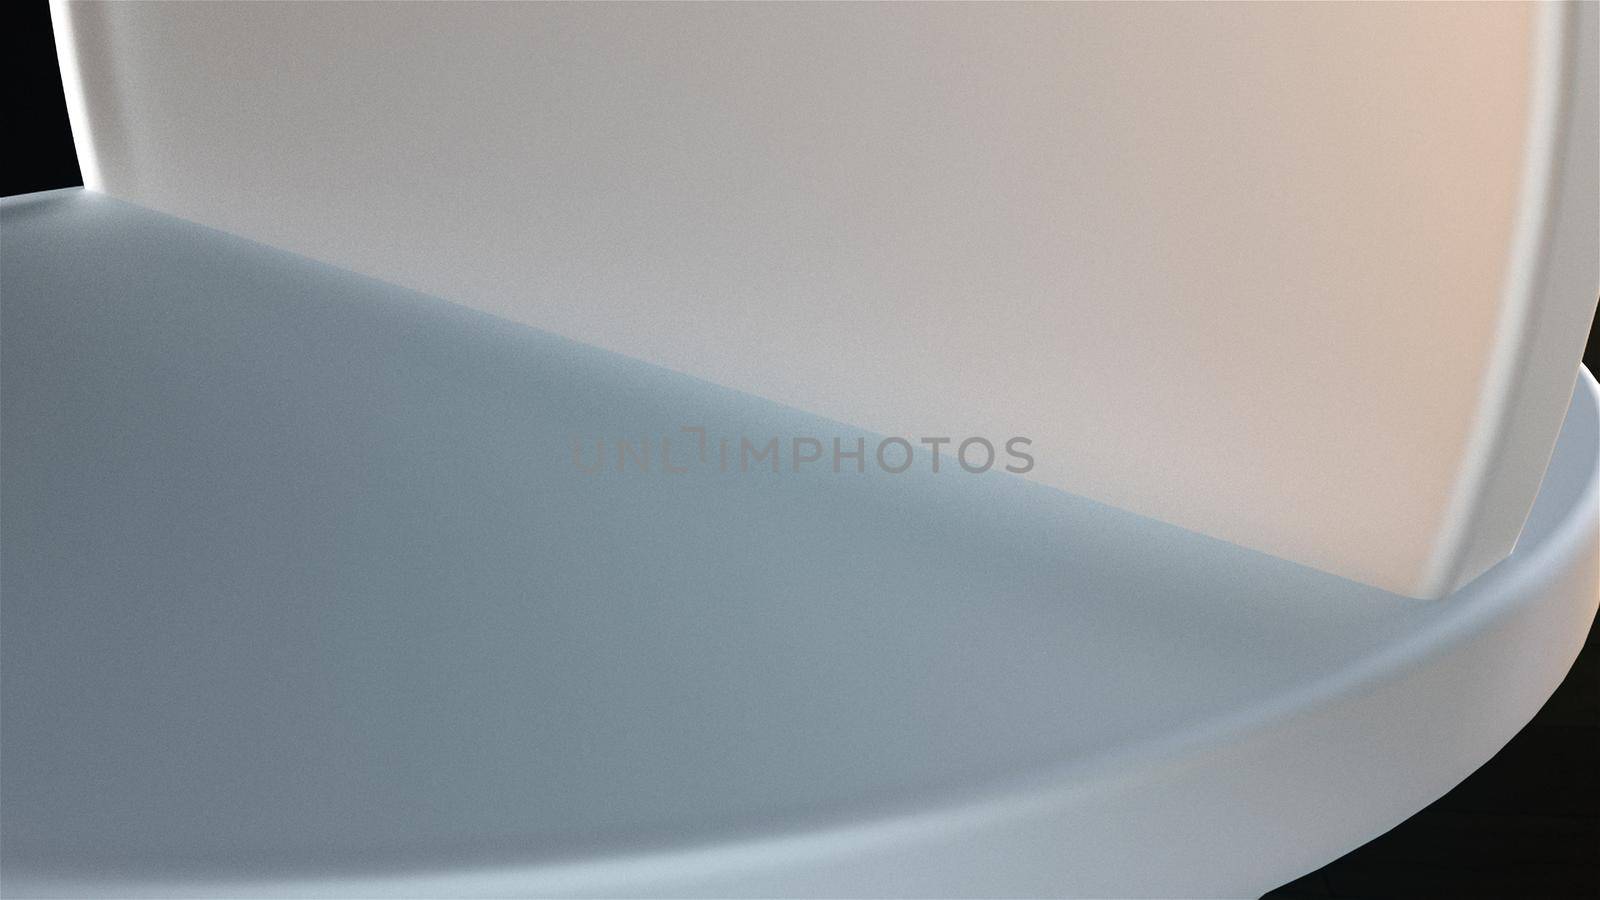 Interior semicircular 3d render elements creating an abstract surface. Architectural rotation with creative visualization. Graphic smoothed minimalism of digital futurism.